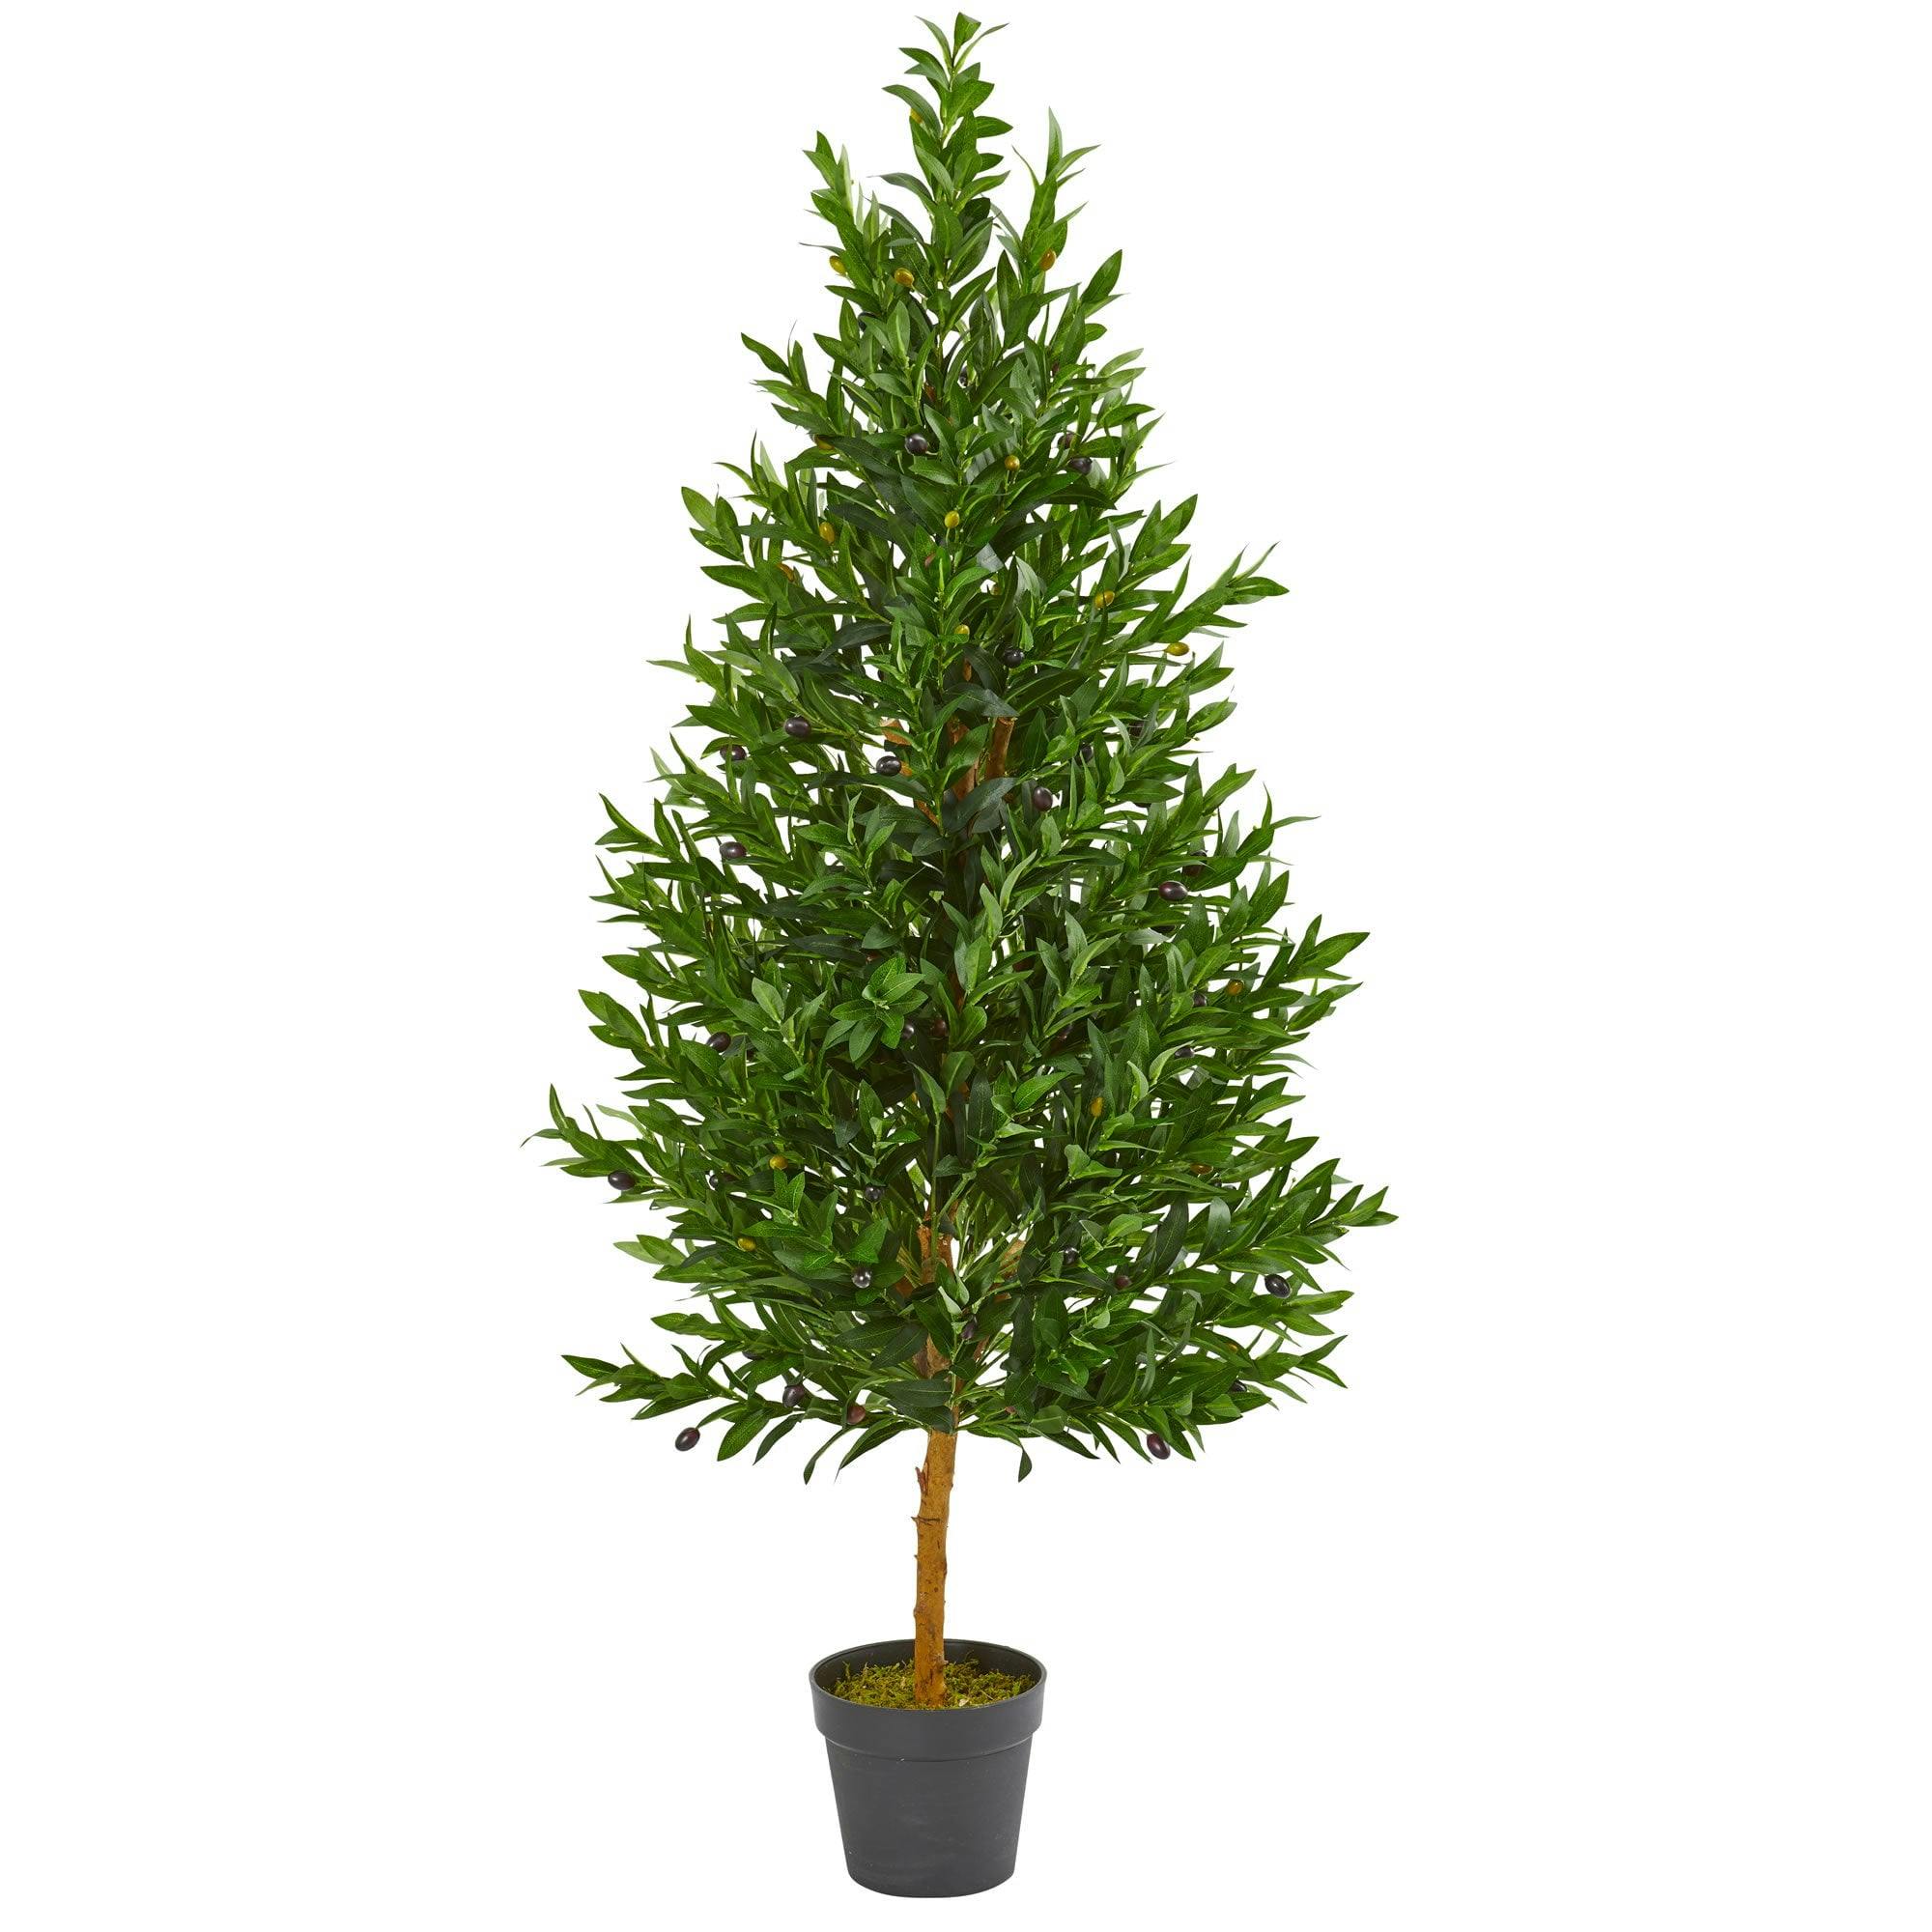 Luminous Silk Outdoor Topiary Tree in Pot with UV-Resistant Foliage, 55"